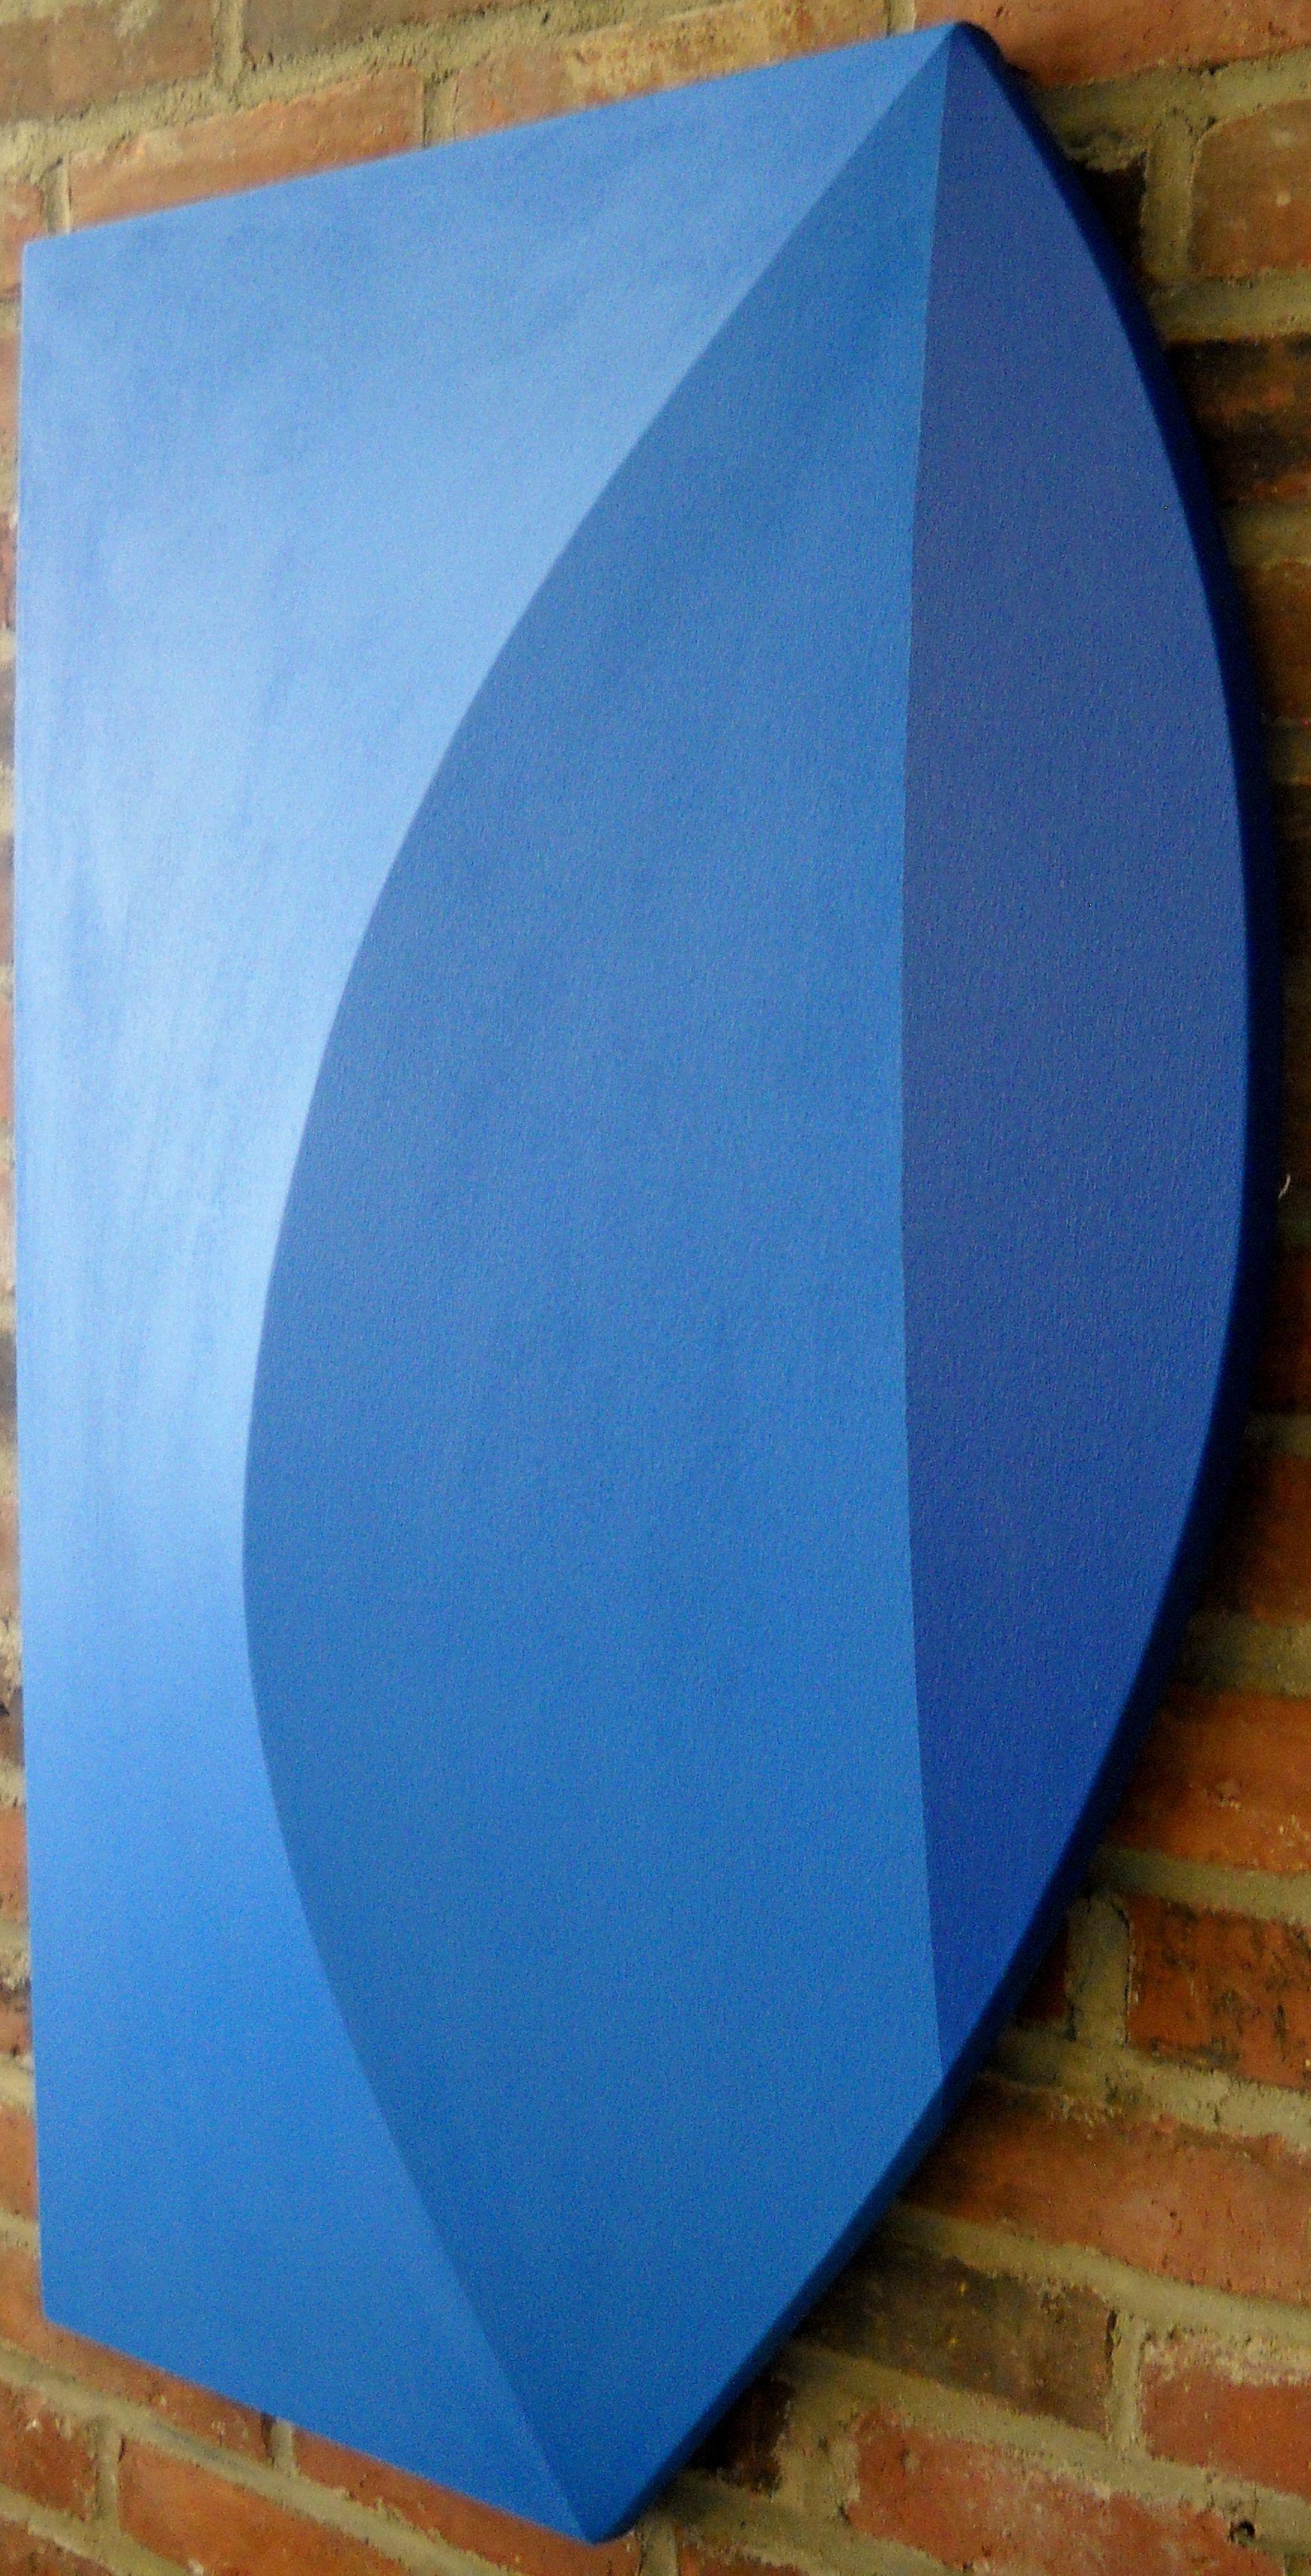 Late in the Day, Painting, Acrylic on Canvas - Blue Abstract Painting by Will Patlove